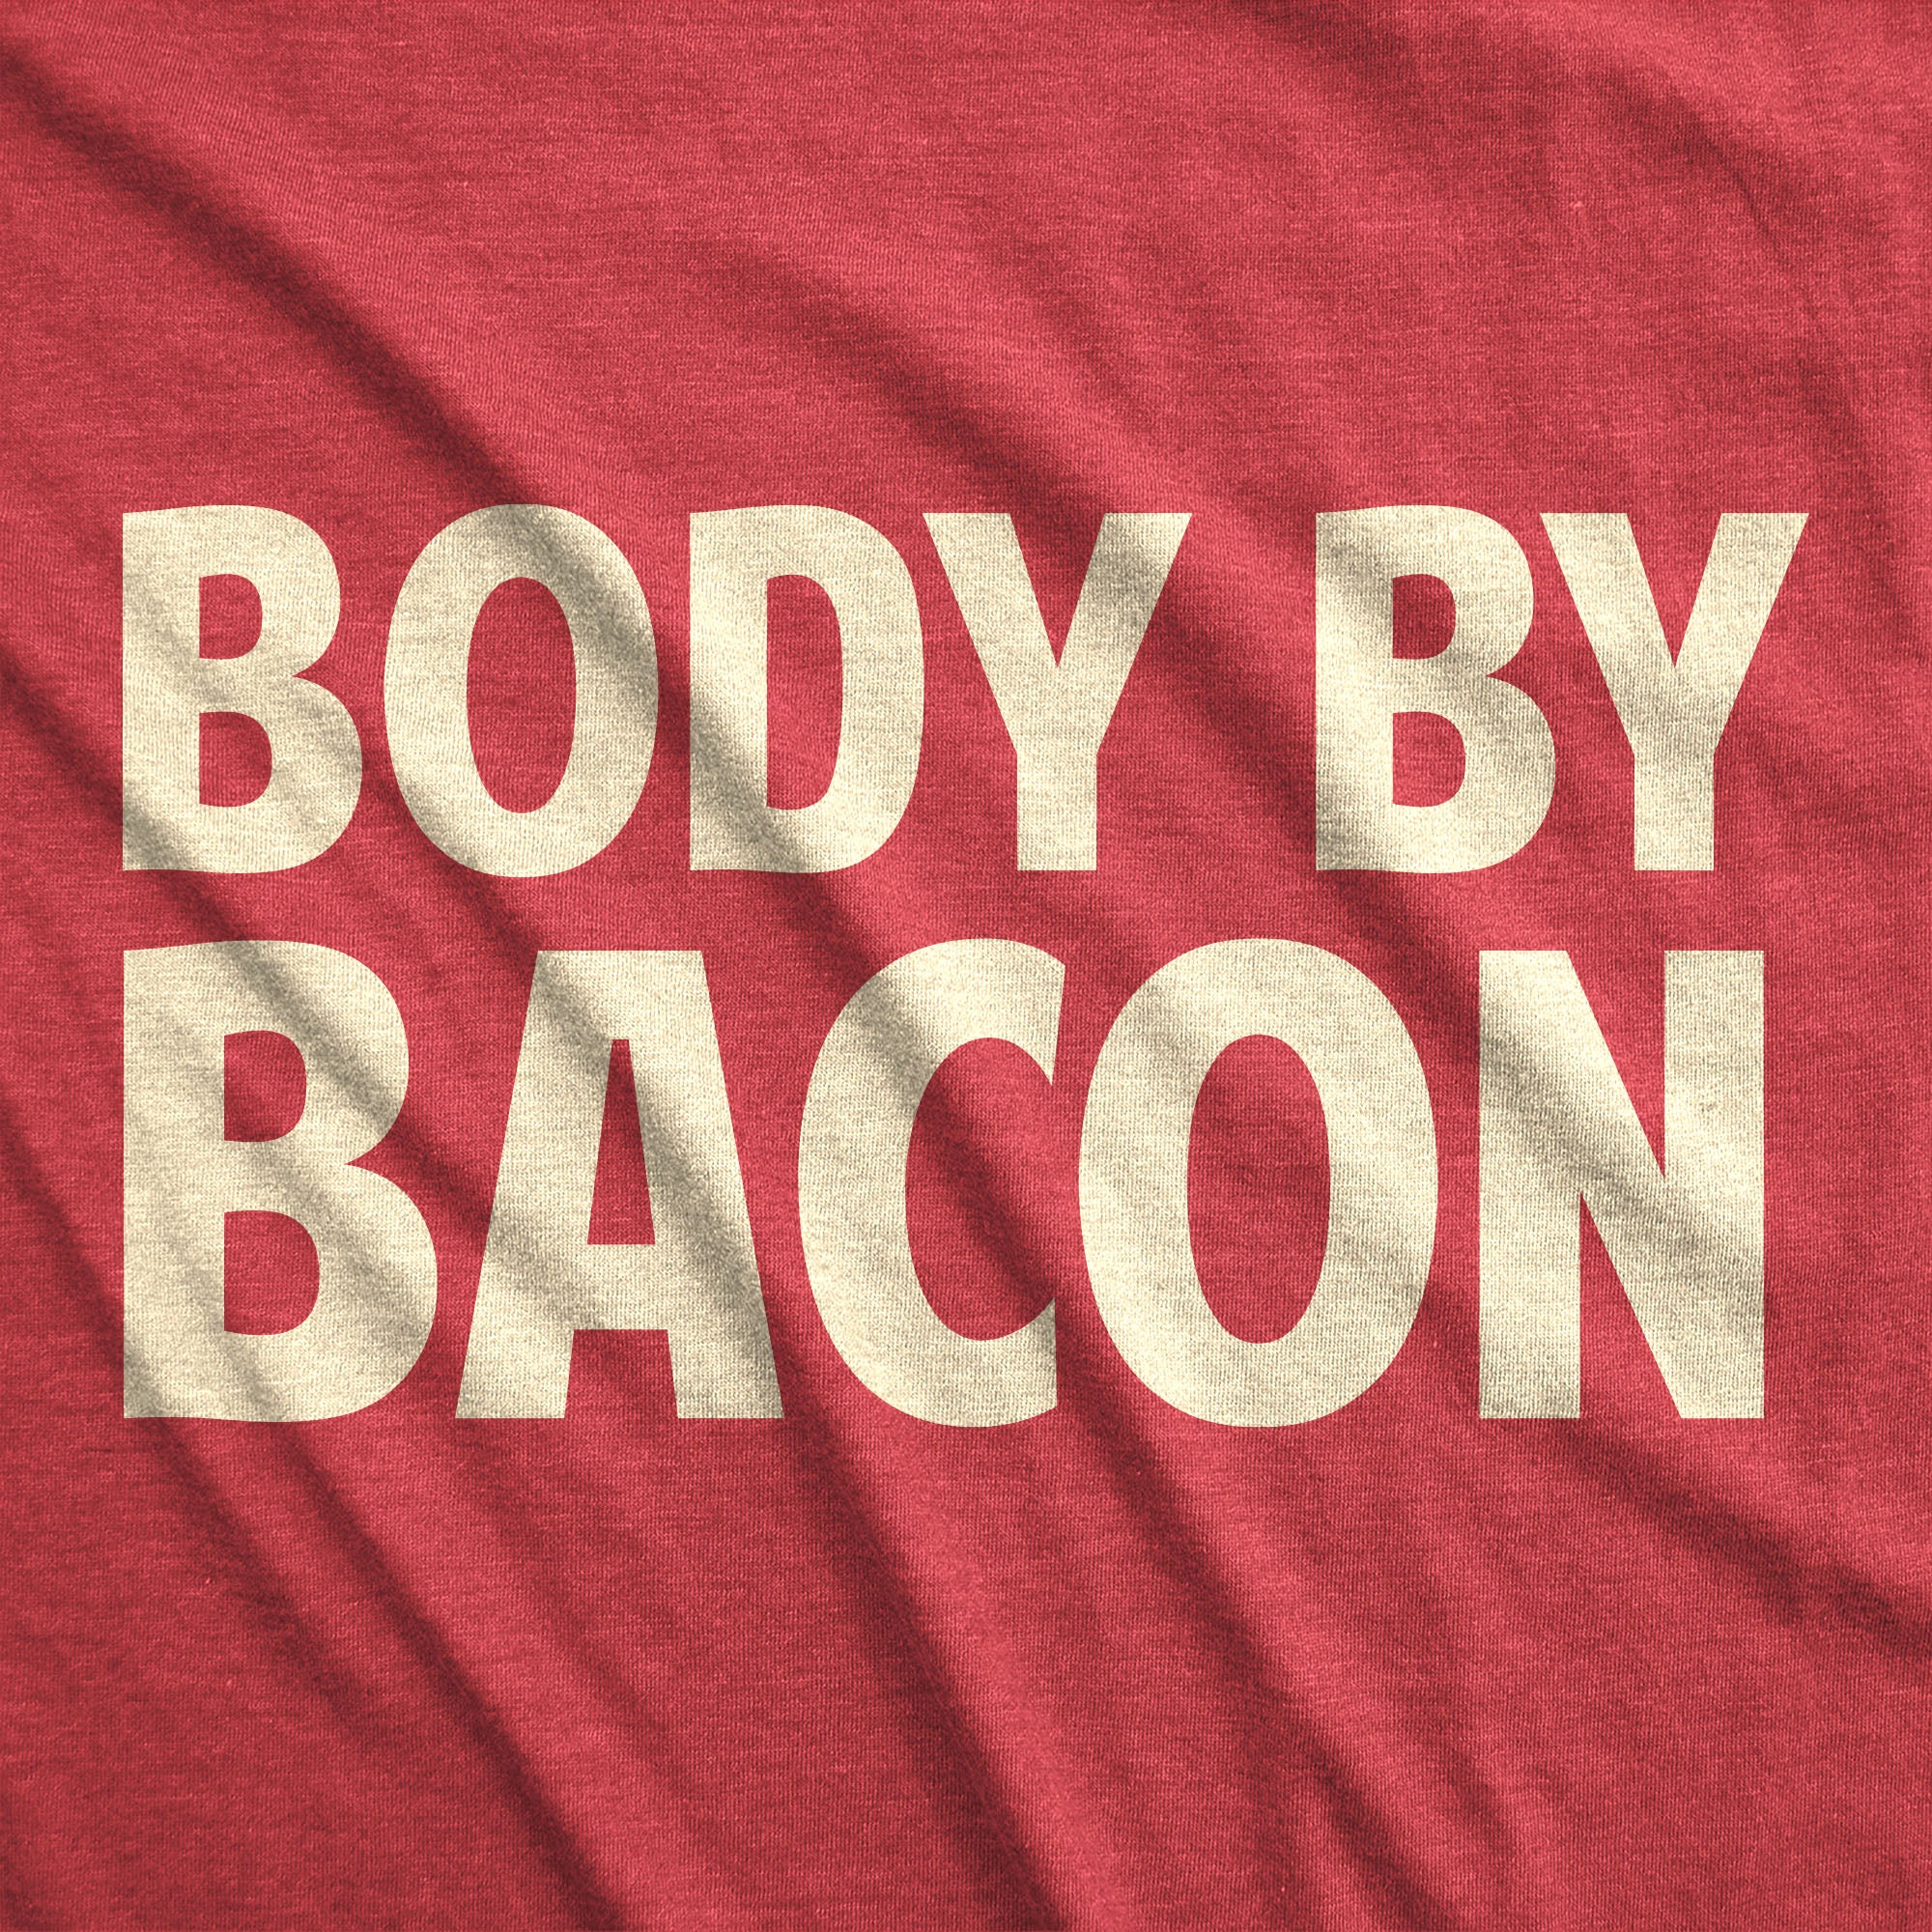 Funny Body By Bacon Mens T Shirt Nerdy Fitness Food Tee